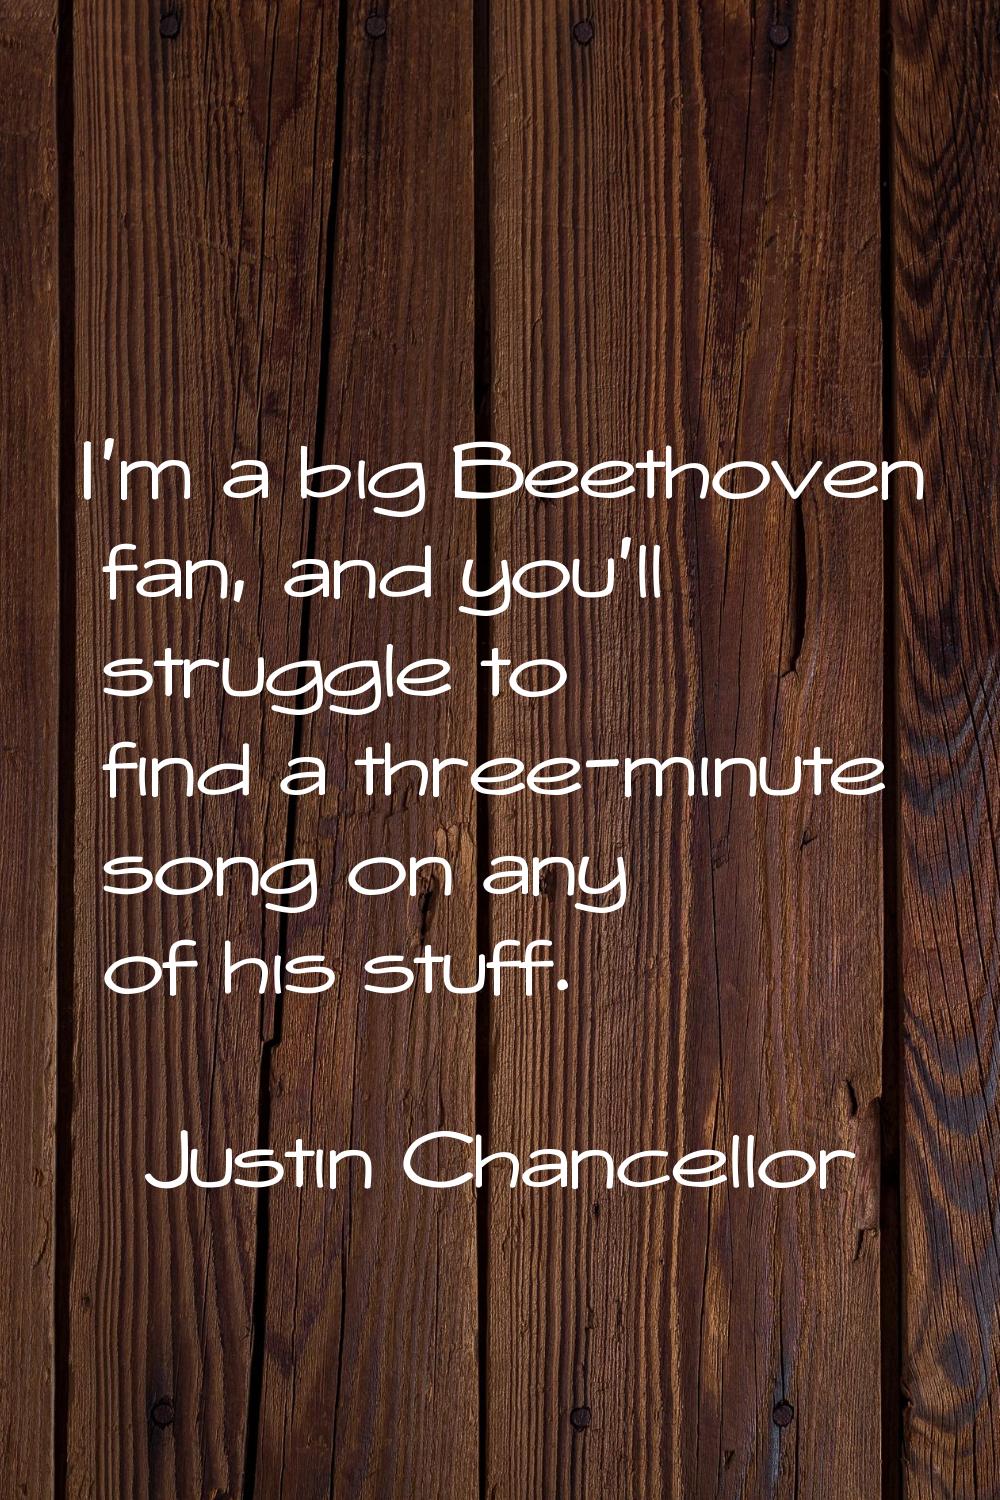 I'm a big Beethoven fan, and you'll struggle to find a three-minute song on any of his stuff.